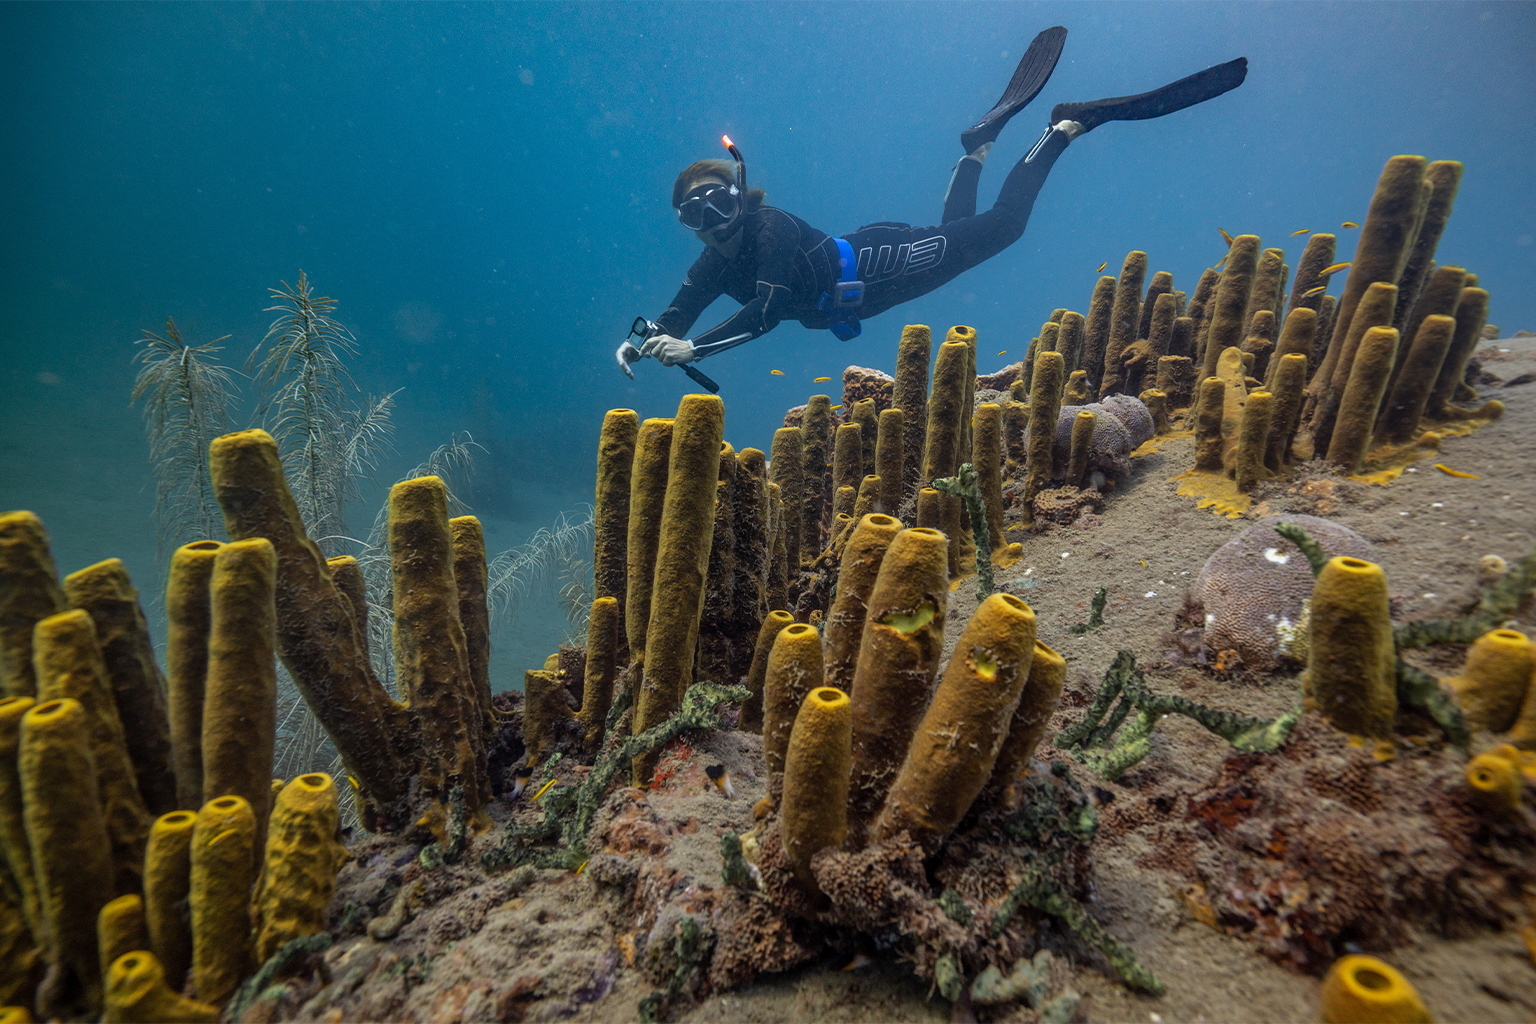 A snorkeler and sea-sponges in Dominican waters.